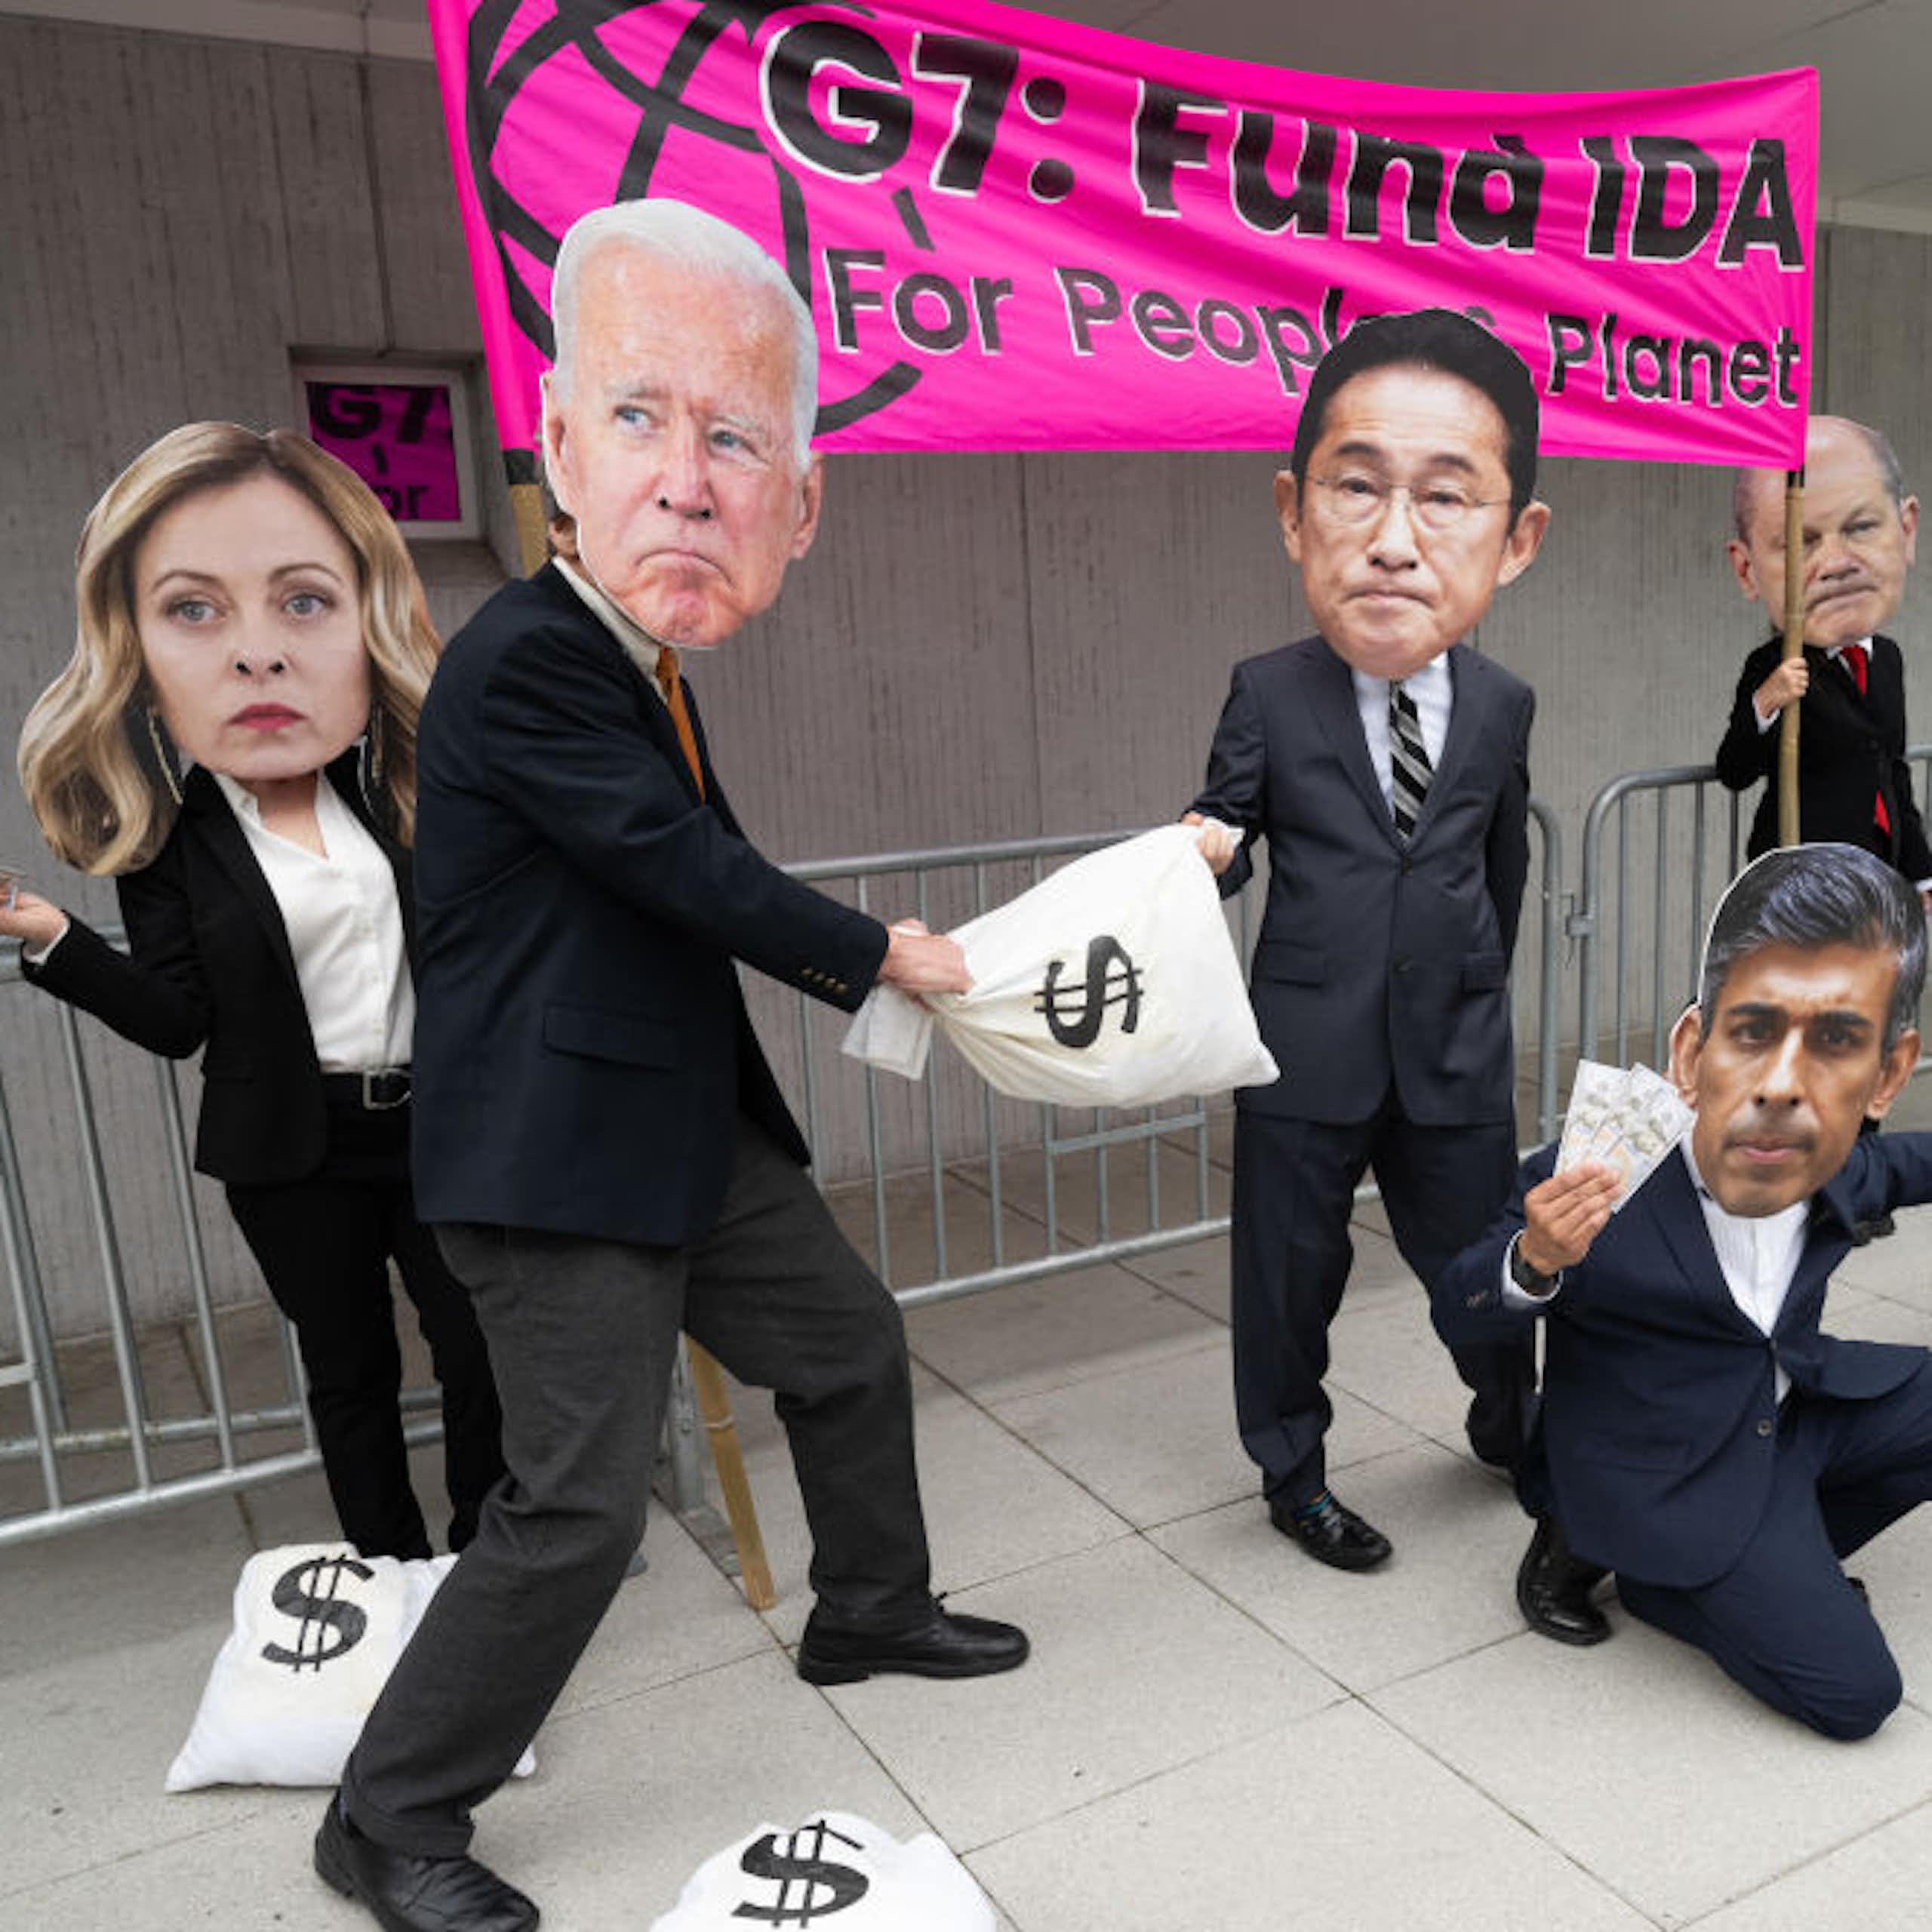 In front of a banner, people in suits carry bags labelled with dollar signs and wear large masks representing the faces of world leaders